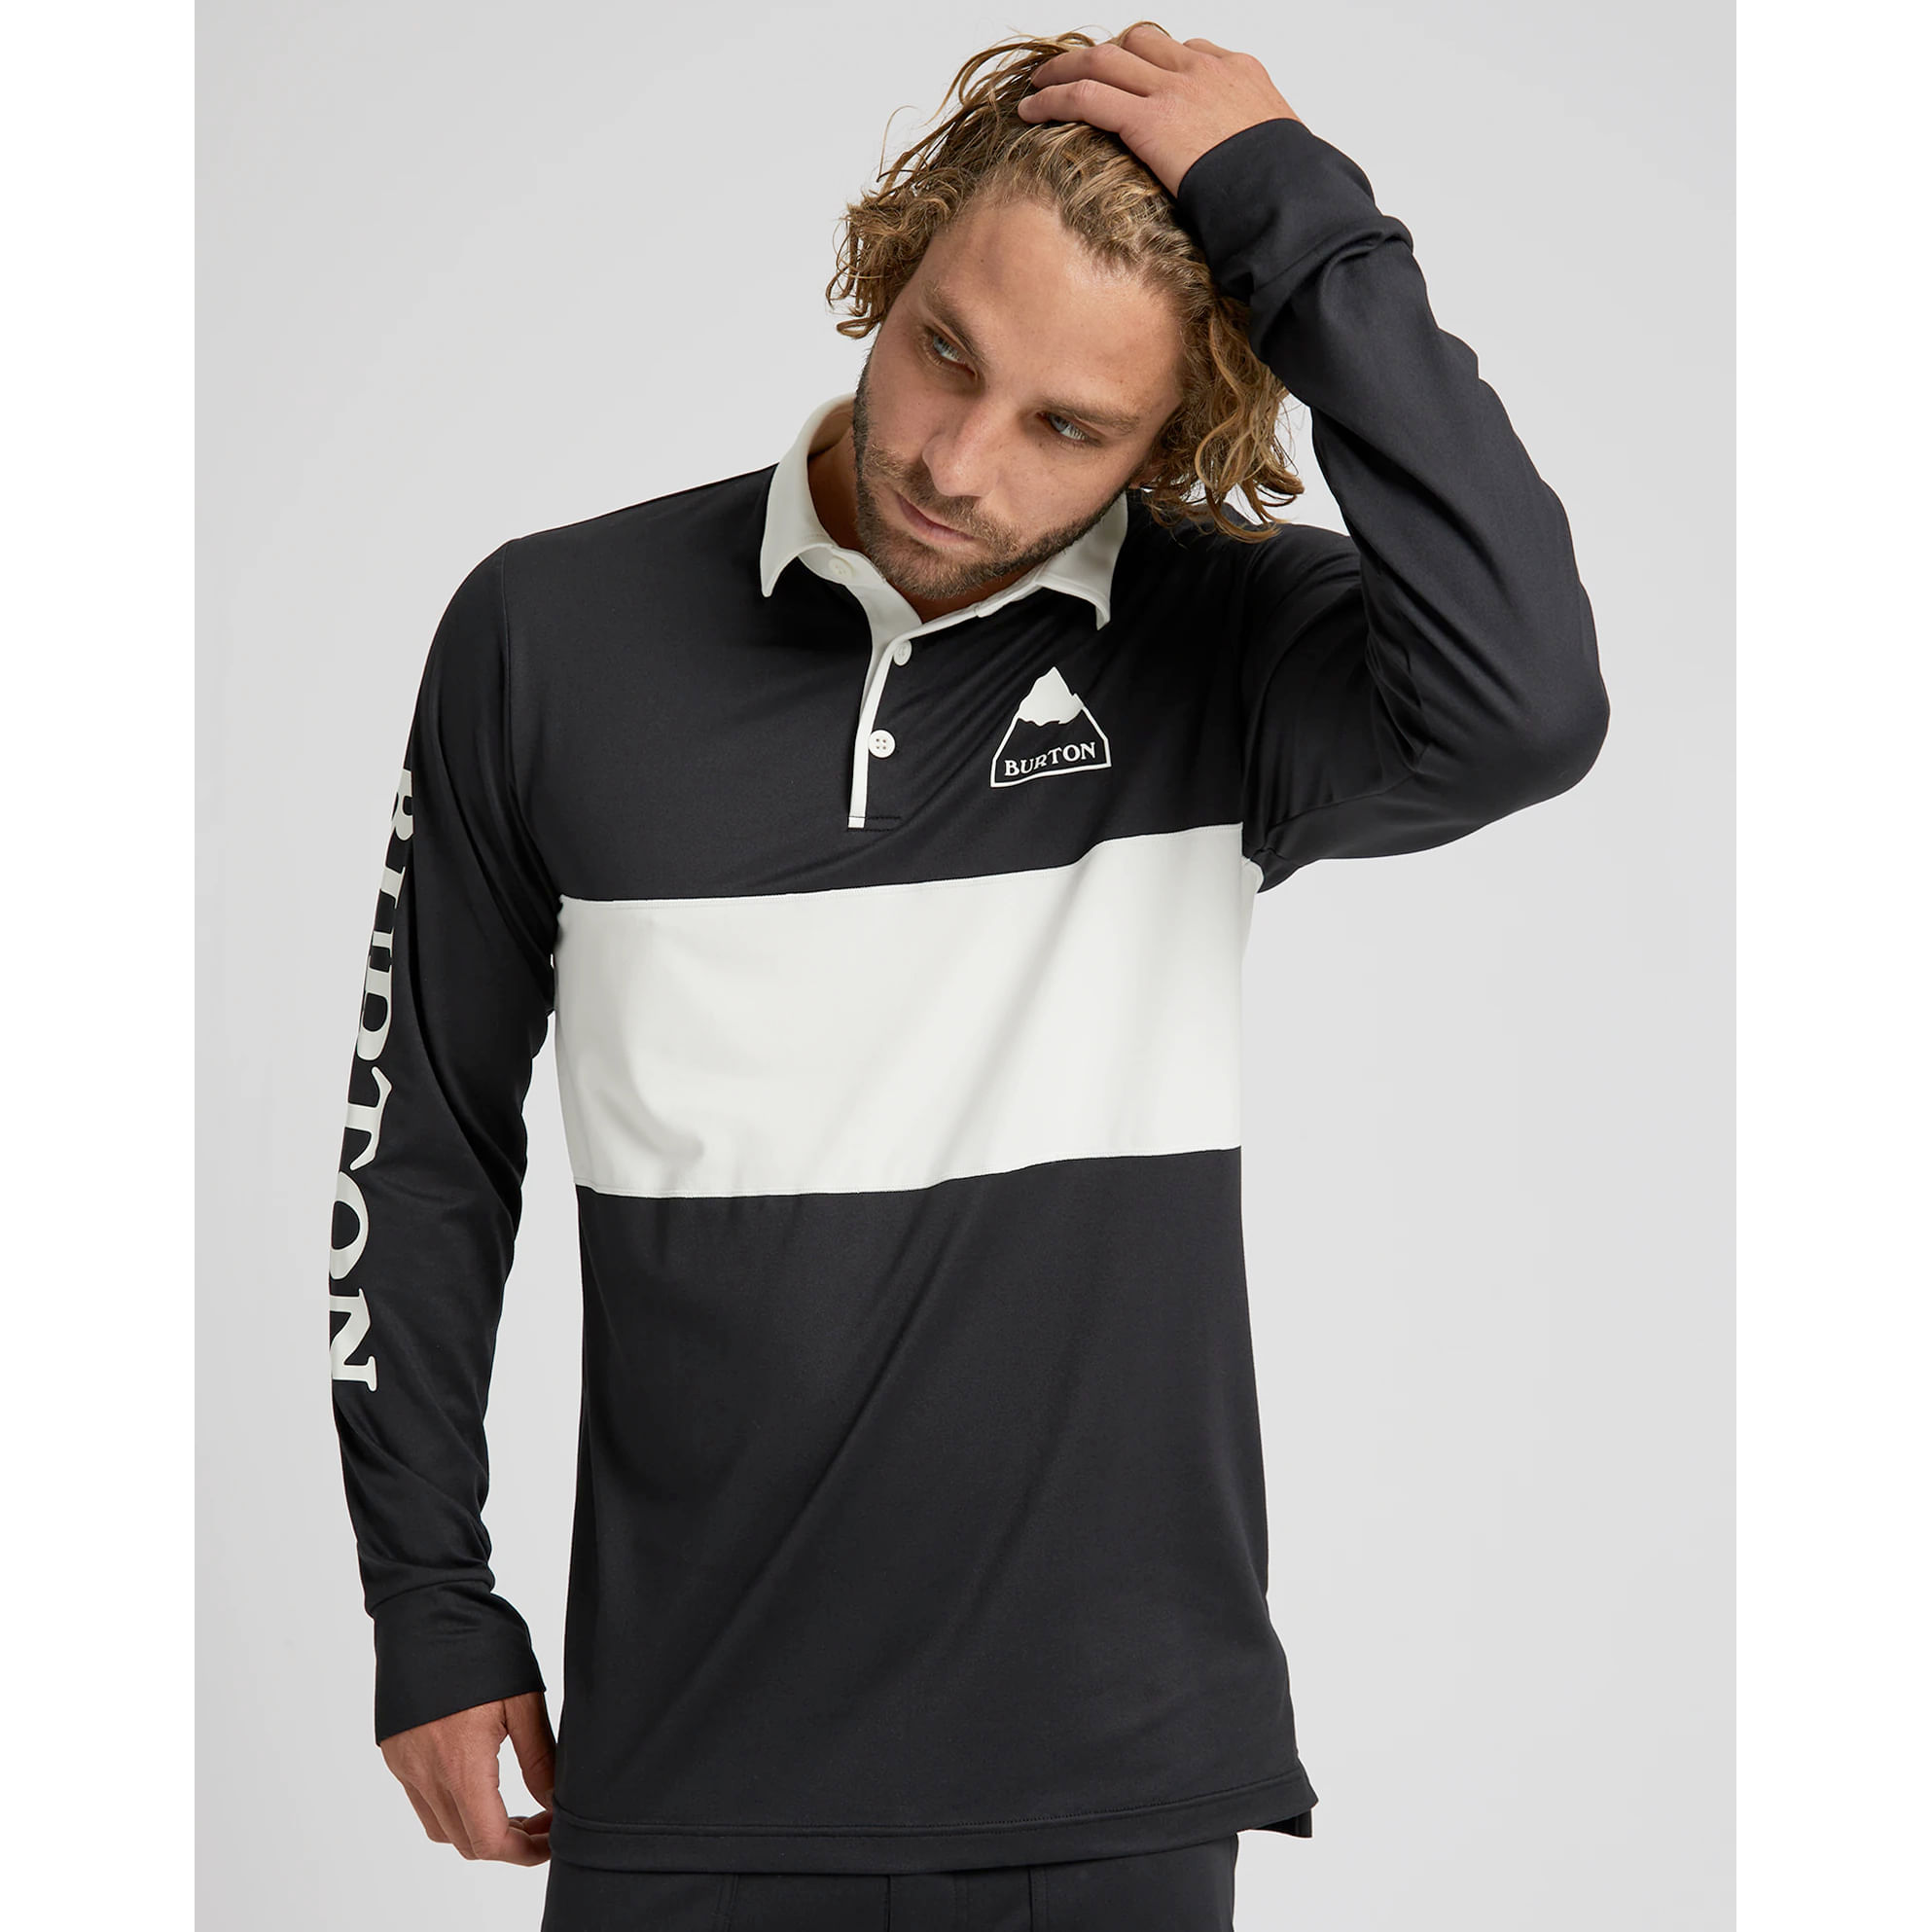 rugby tops online